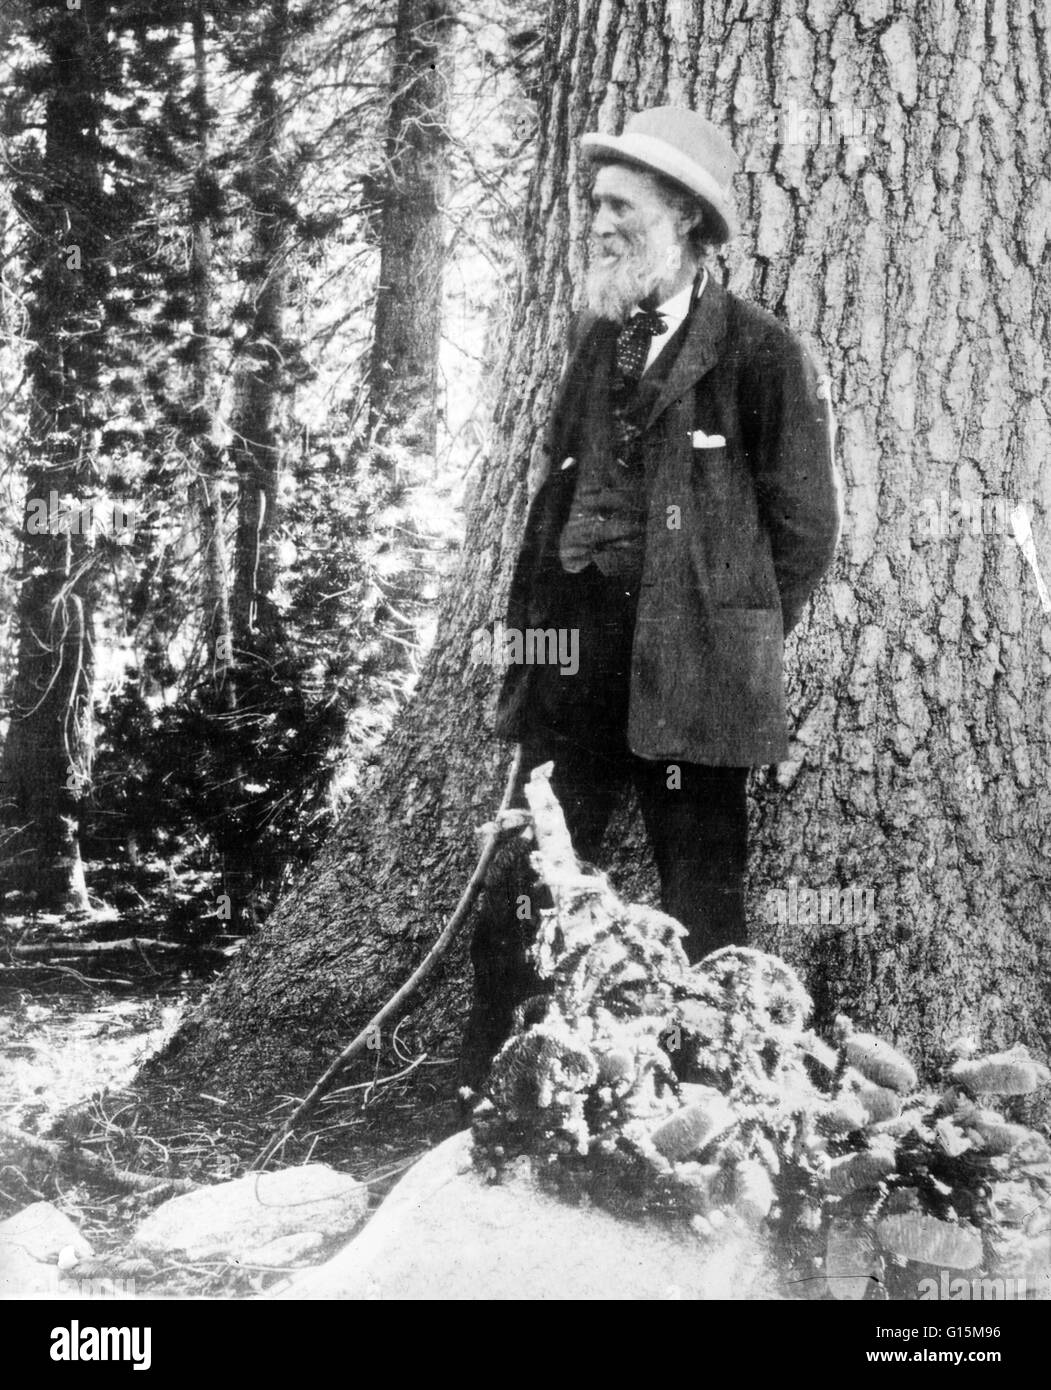 John Muir (April 21, 1838 - December 24, 1914) was a Scottish-born American naturalist, author, and early advocate of preservation of wilderness in the United States. His letters, essays, and books telling of his adventures in nature, especially in the Si Stock Photo